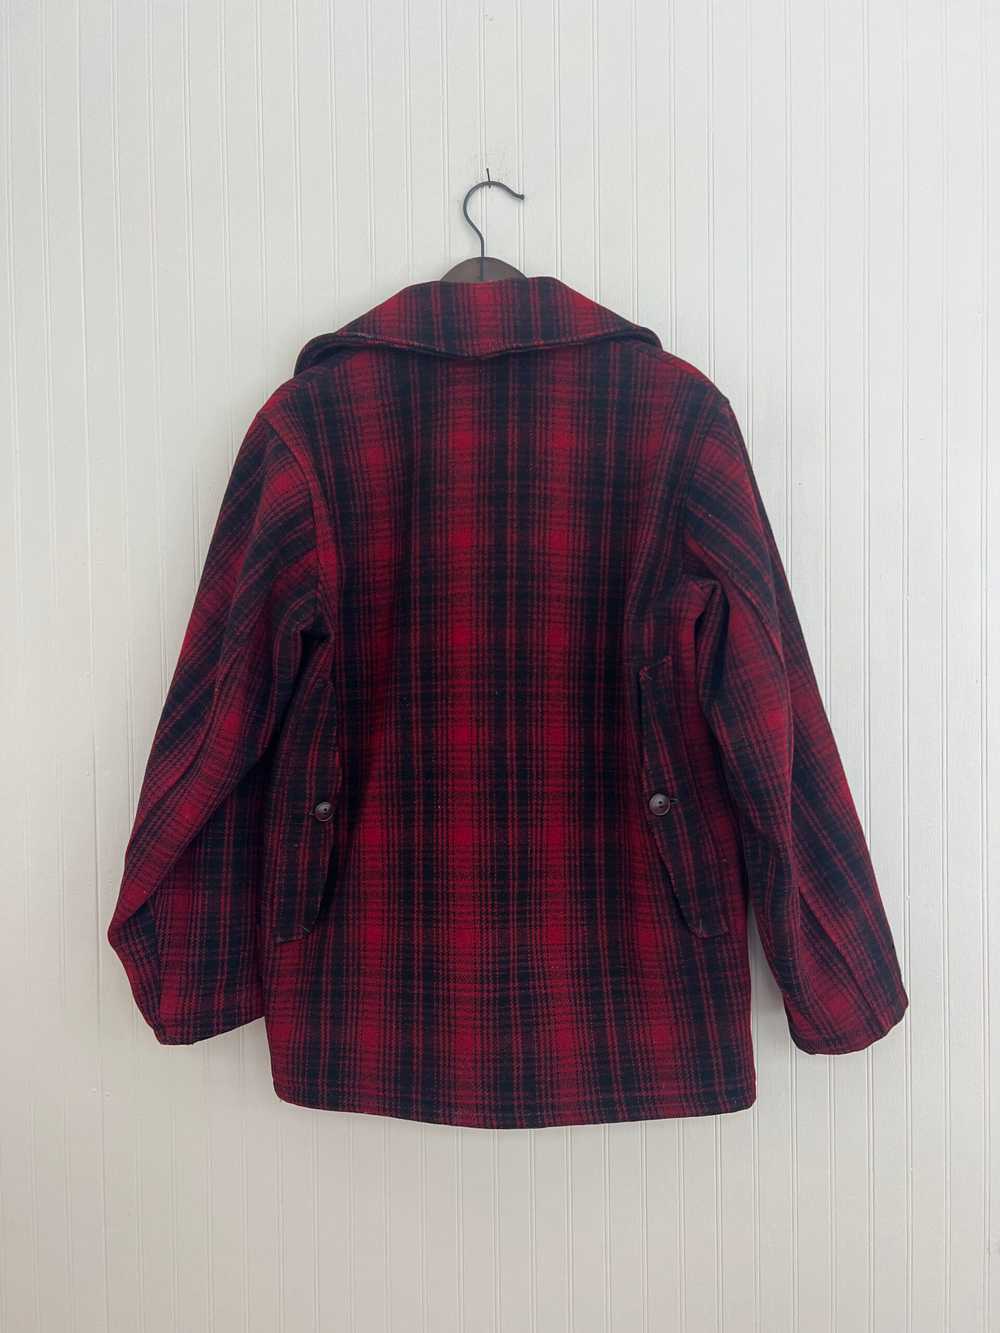 Late 40s/Early 50s Woolrich Mackinaw Wool Jacket - image 10